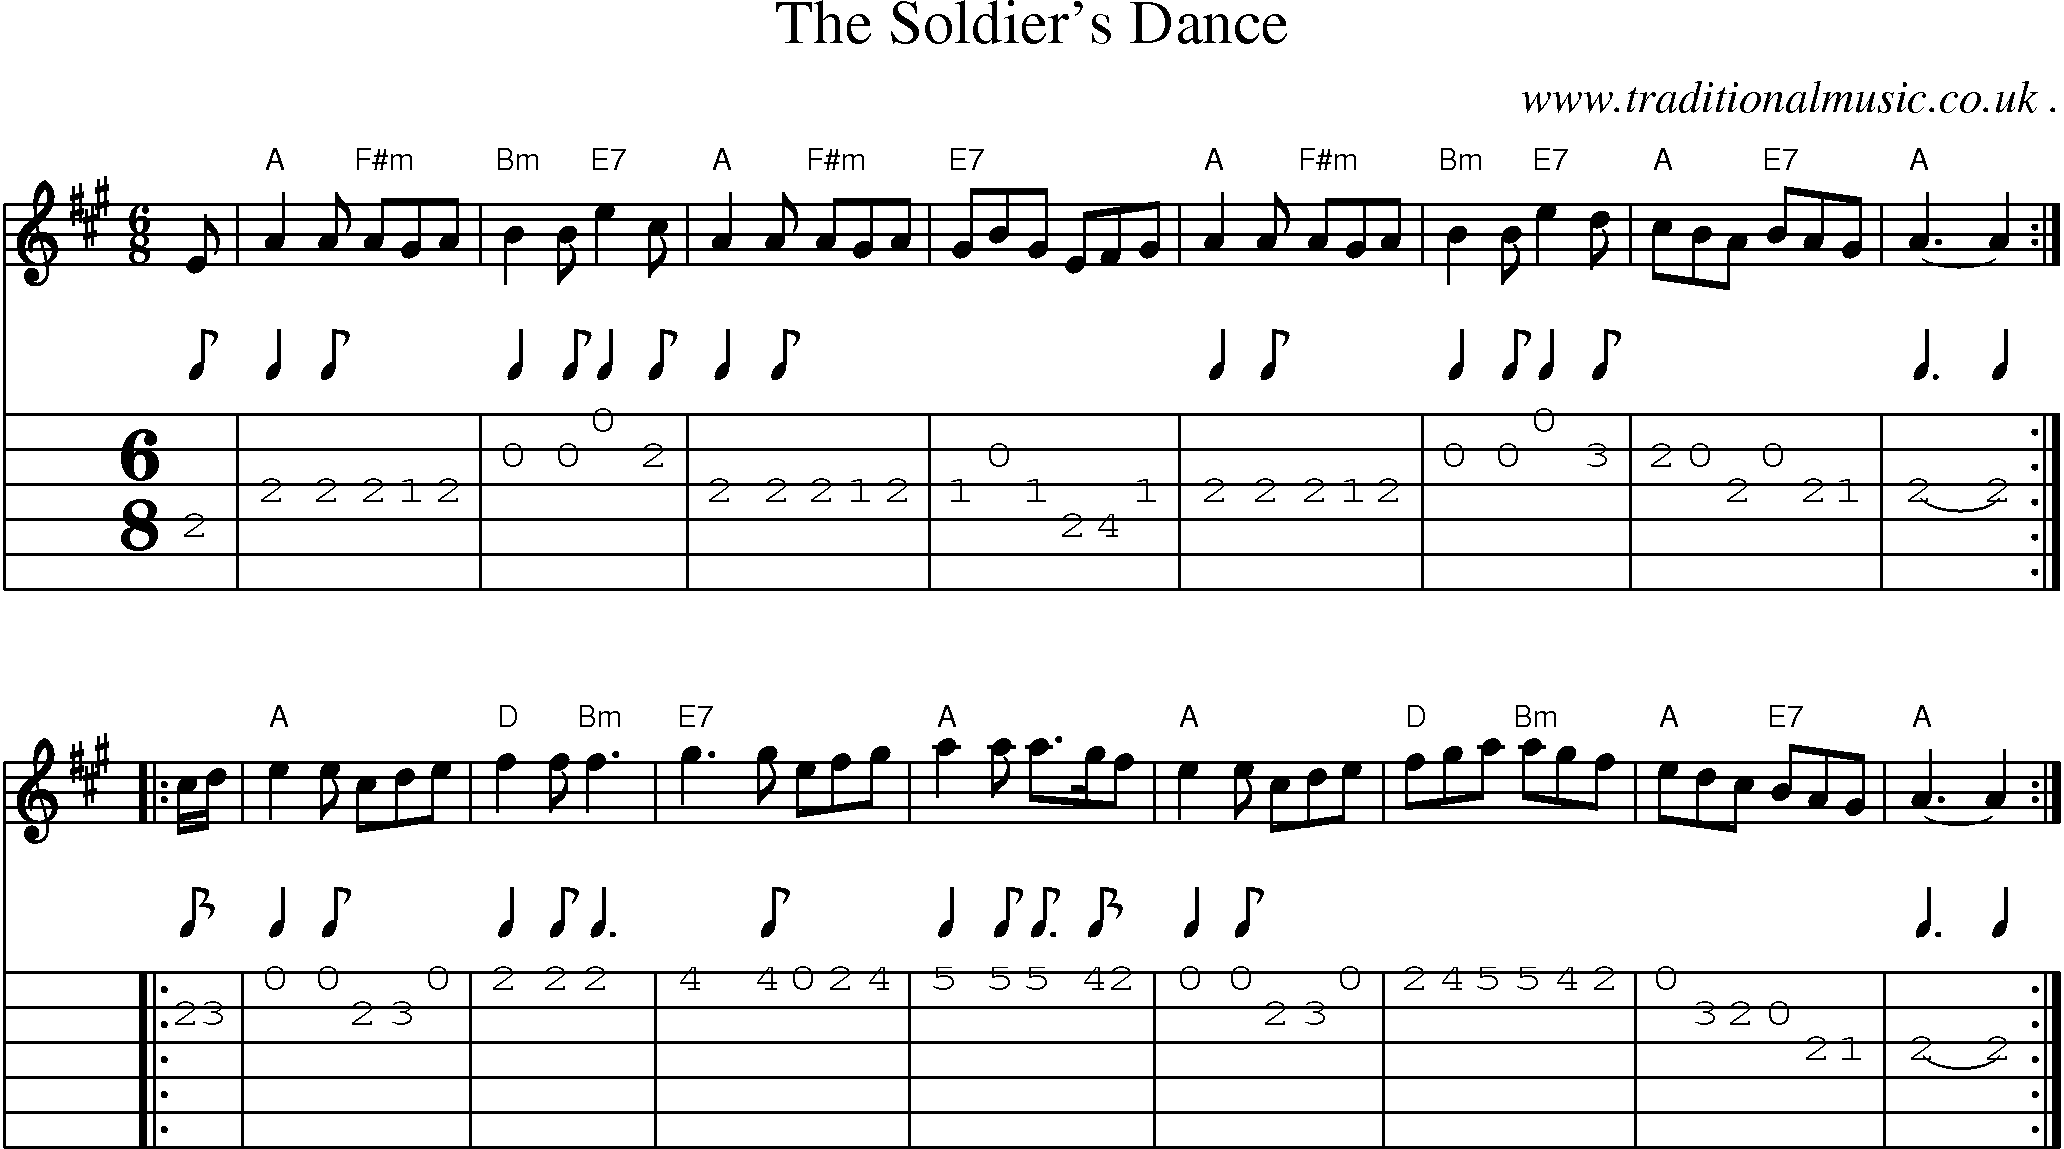 Sheet-music  score, Chords and Guitar Tabs for The Soldiers Dance